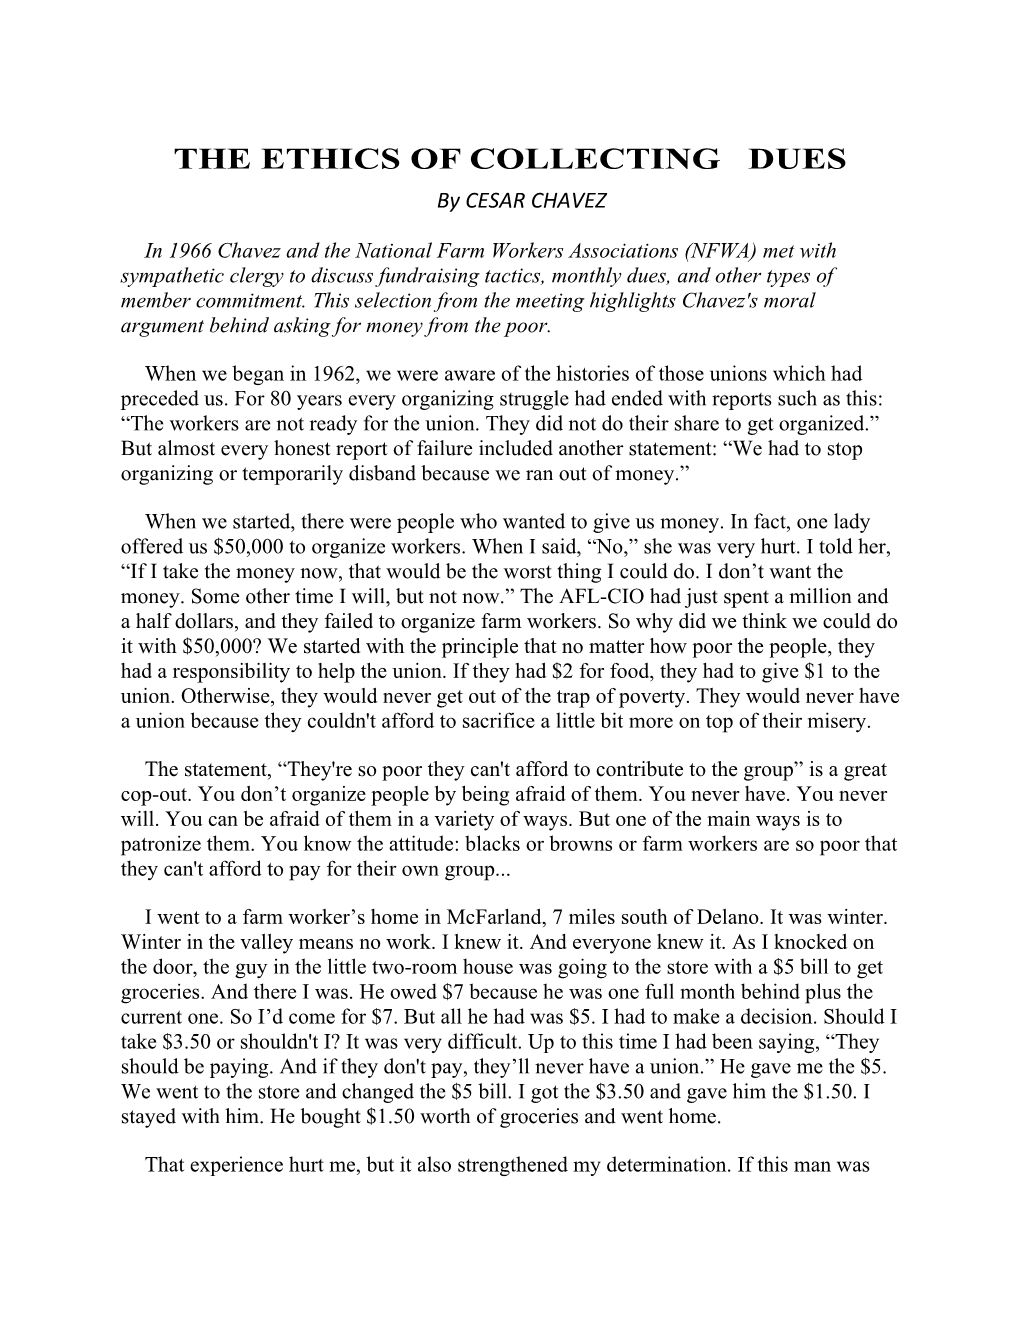 The Ethics of Collecting Dues